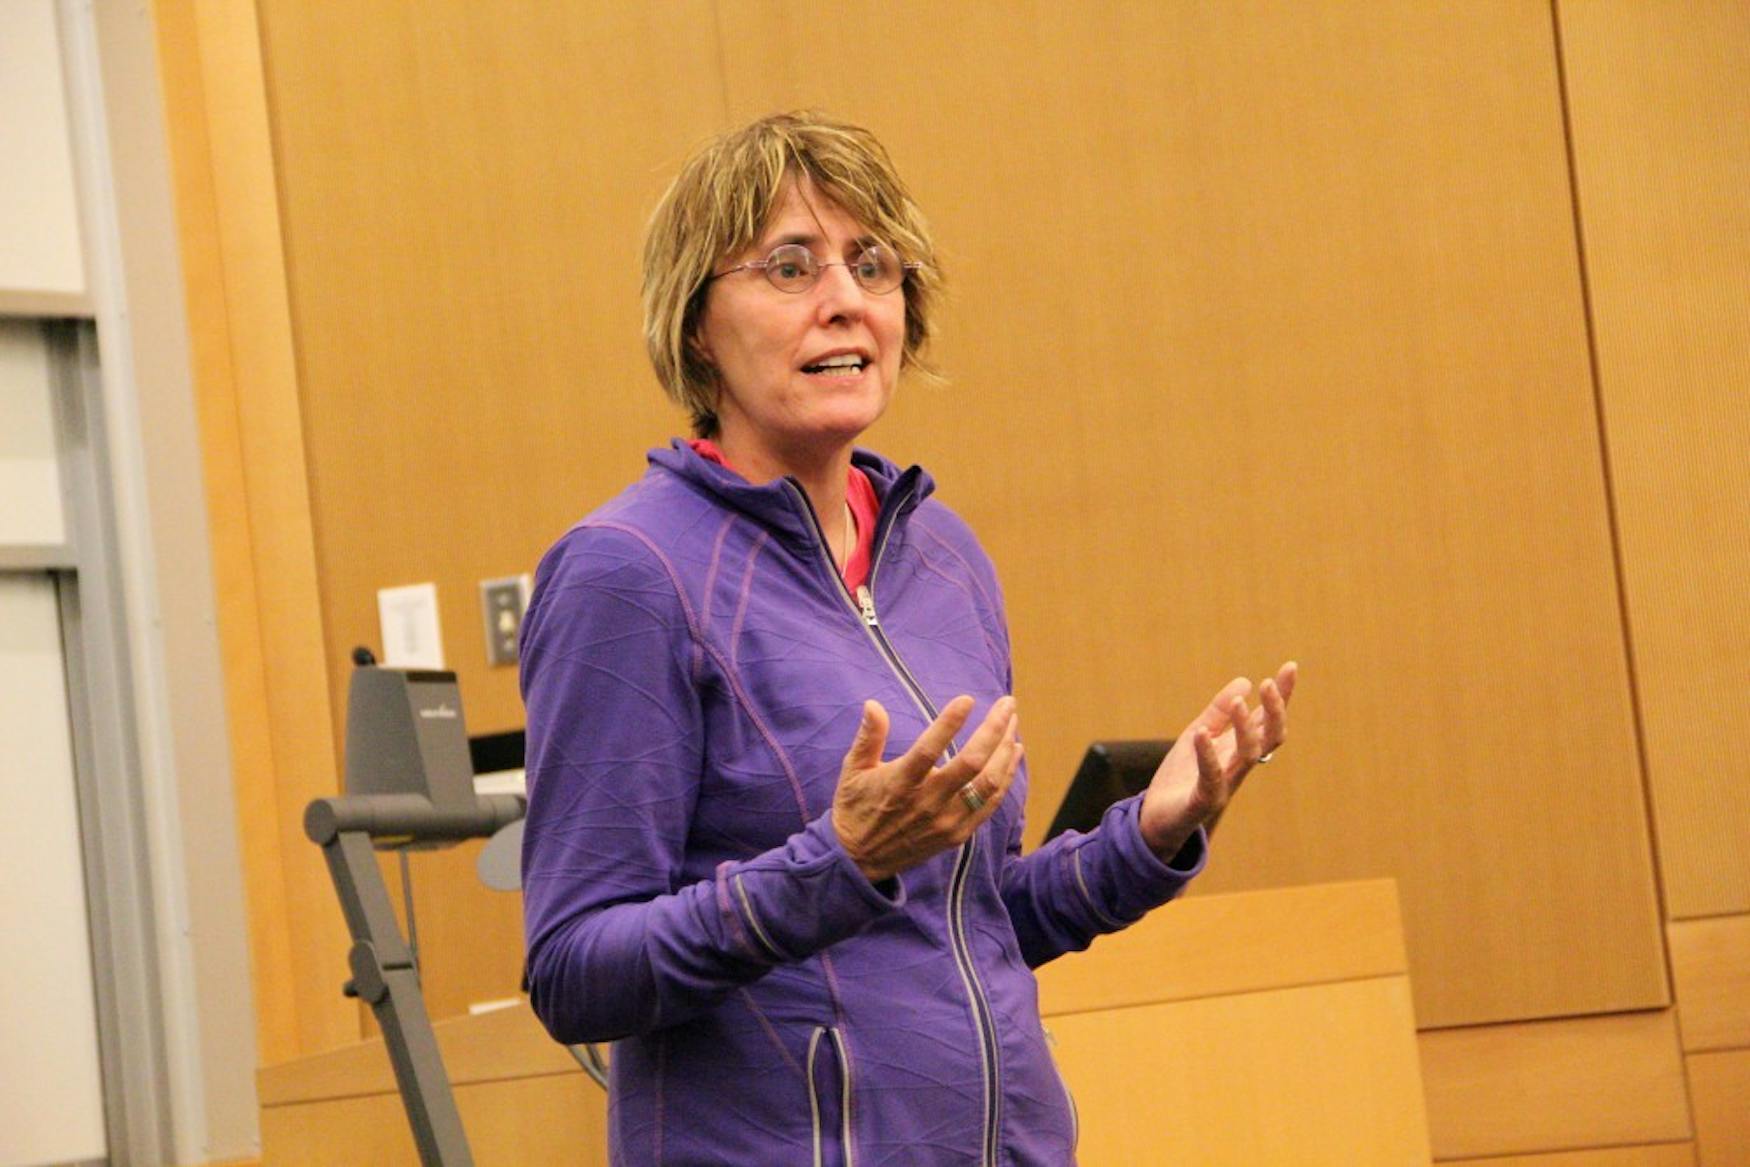 Kay Wilson spoke about her experiences and trauma on Tuesday at the Mandel Center for the Humanities.